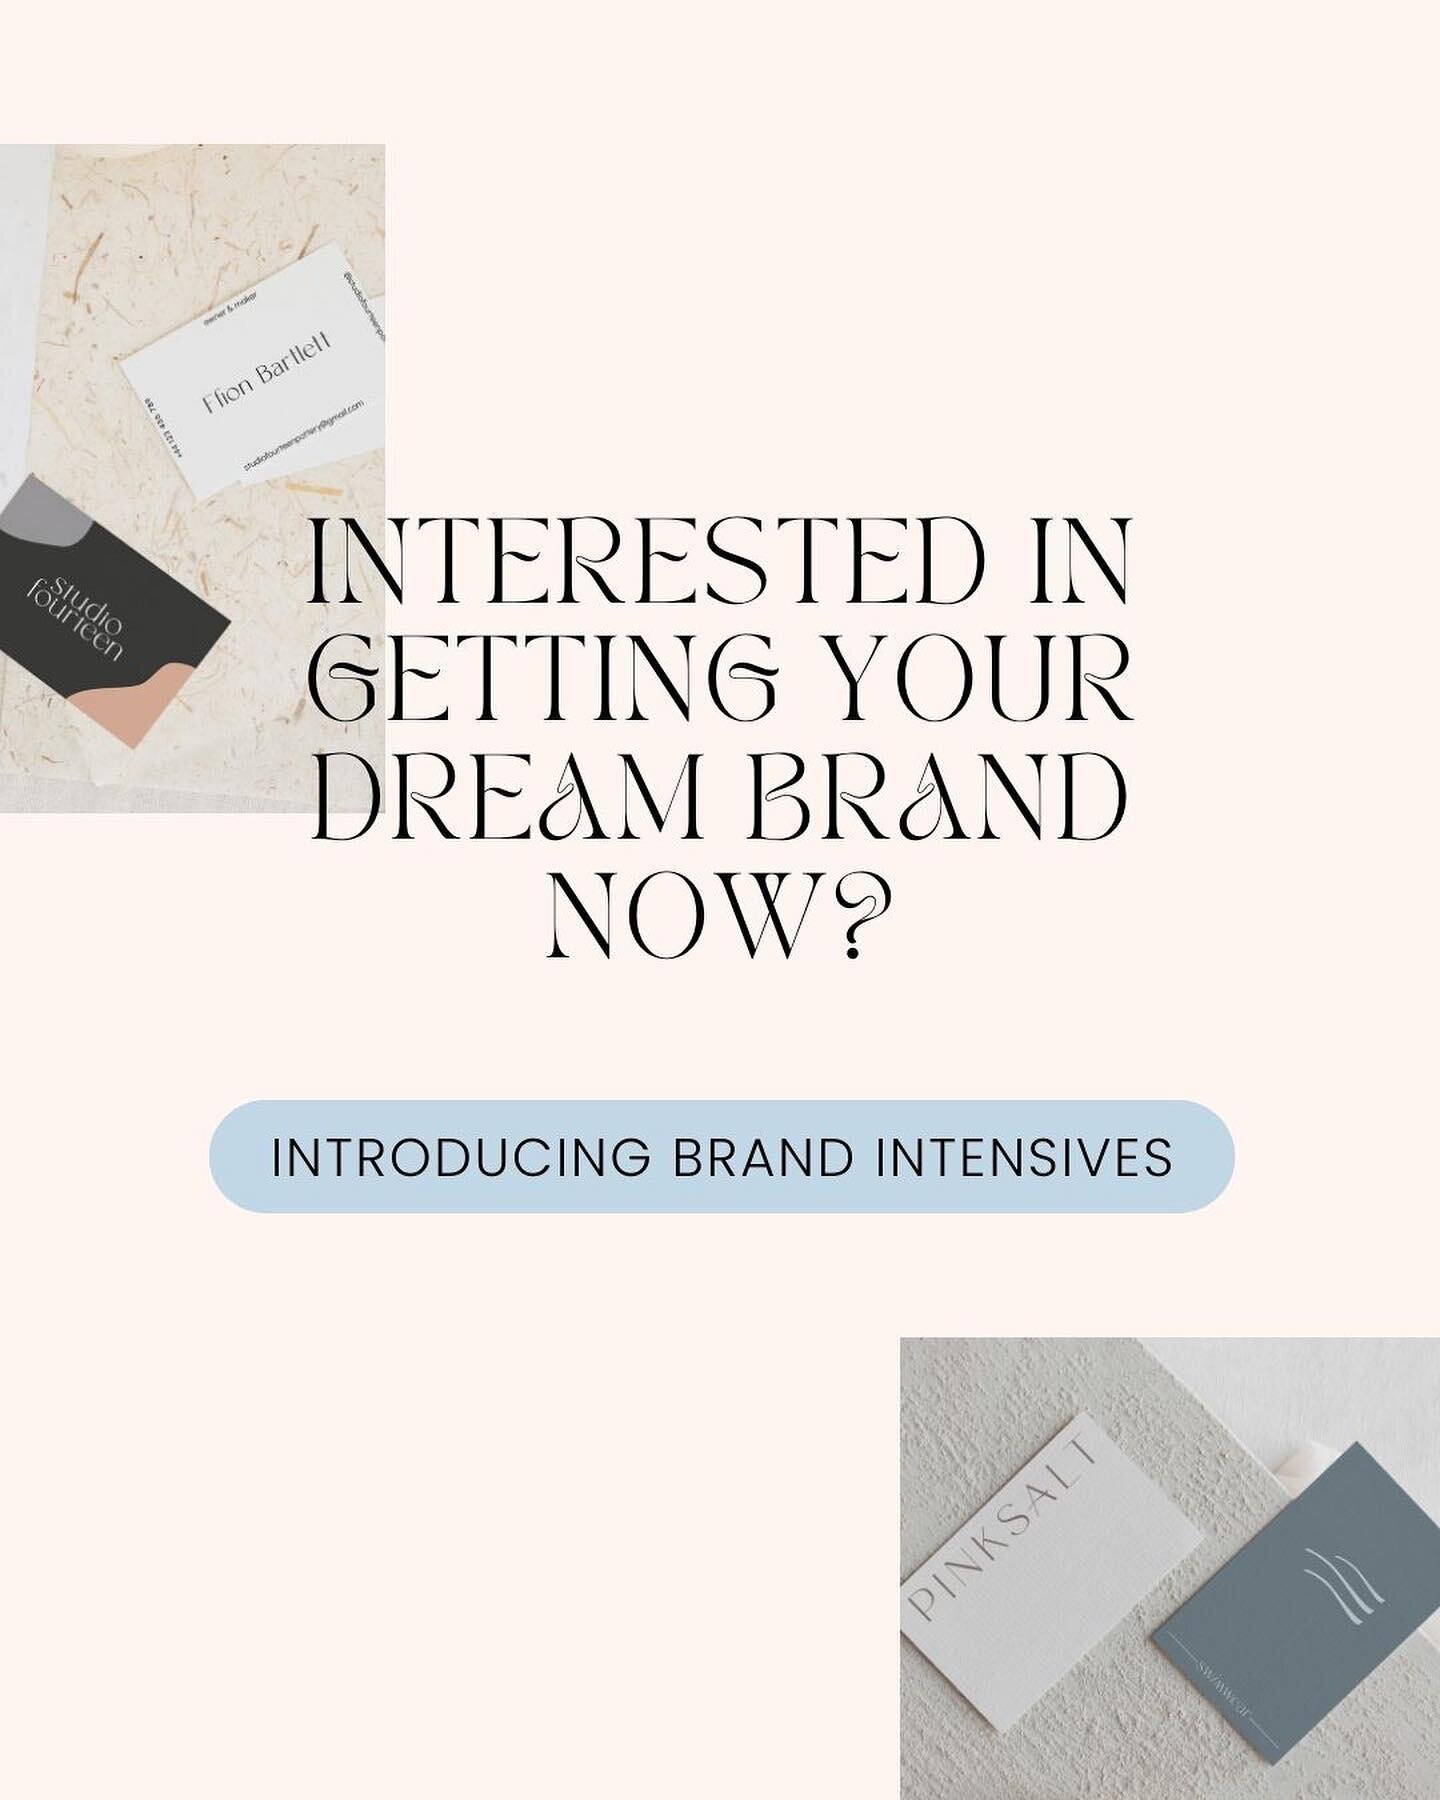 So excited to announce a new offer - Brand Intensives! 

I&rsquo;m honestly so excited to share this! It&rsquo;s the perfect fit for someone who:

✨ is just beginning and needs something to get started 

✨ has been in business for a little while, has